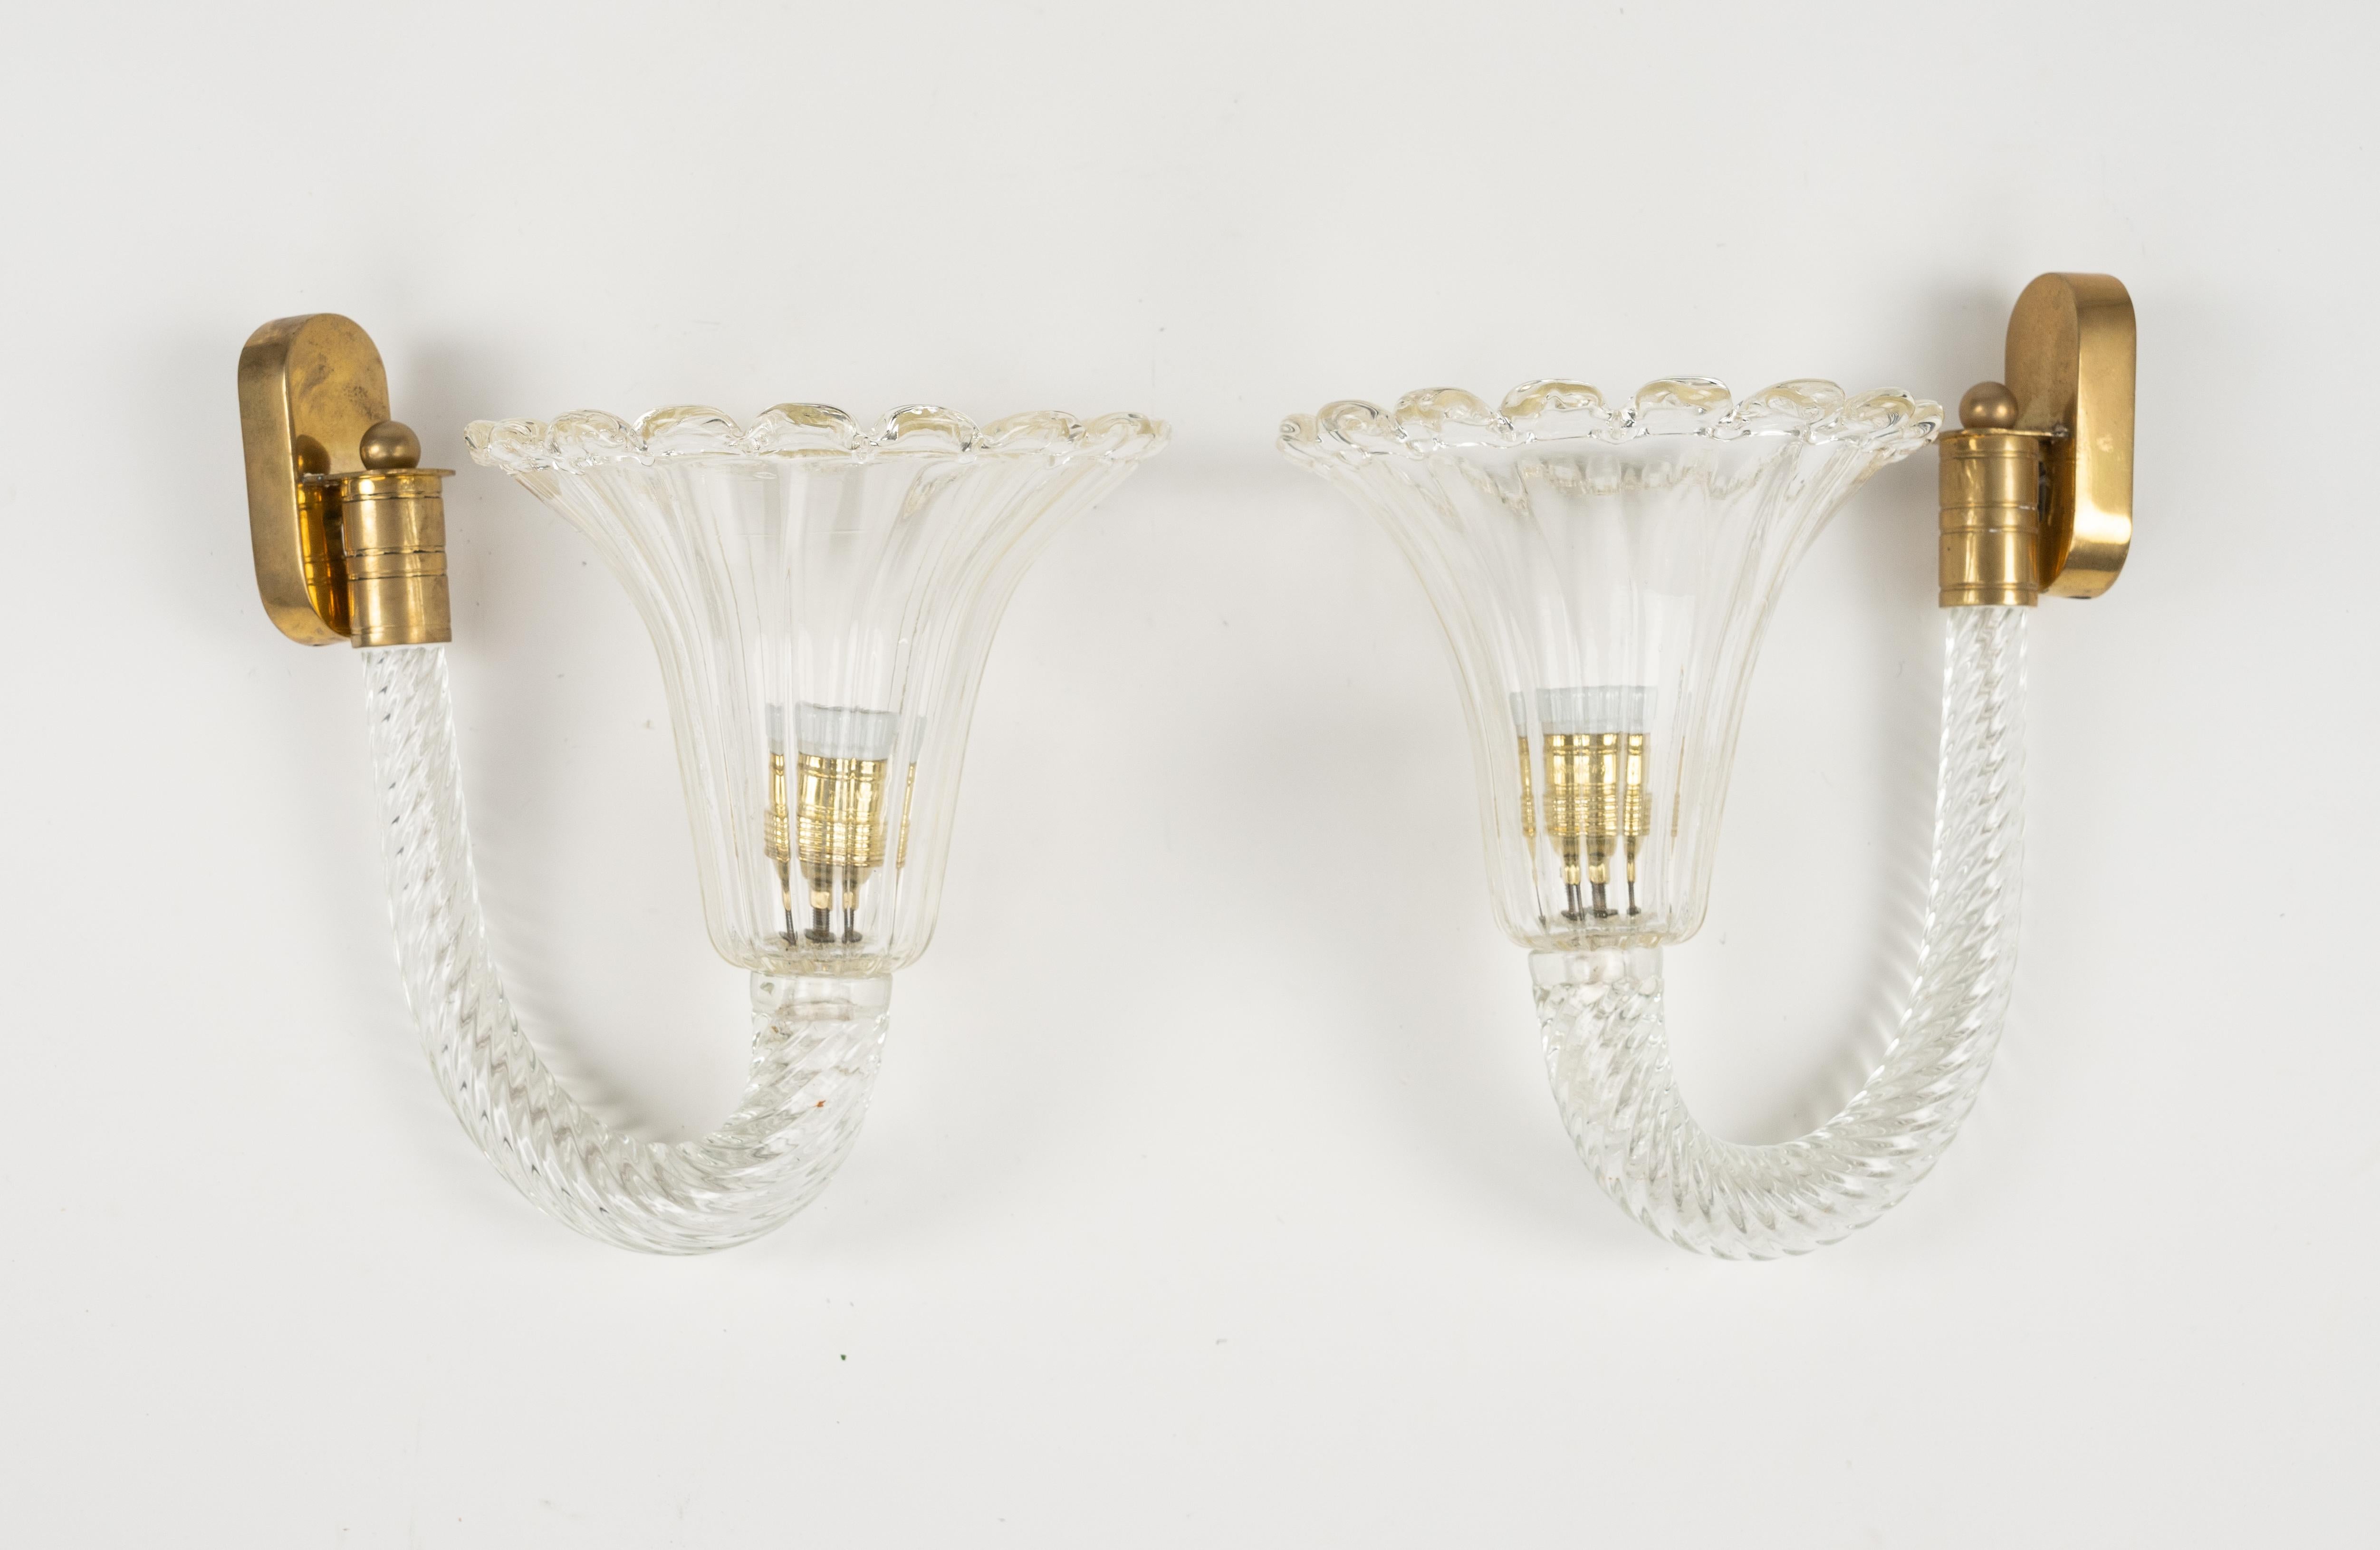 Pair of Sconces Murano Glass & Brass Barovier & Toso Style, Italy 1950s For Sale 4